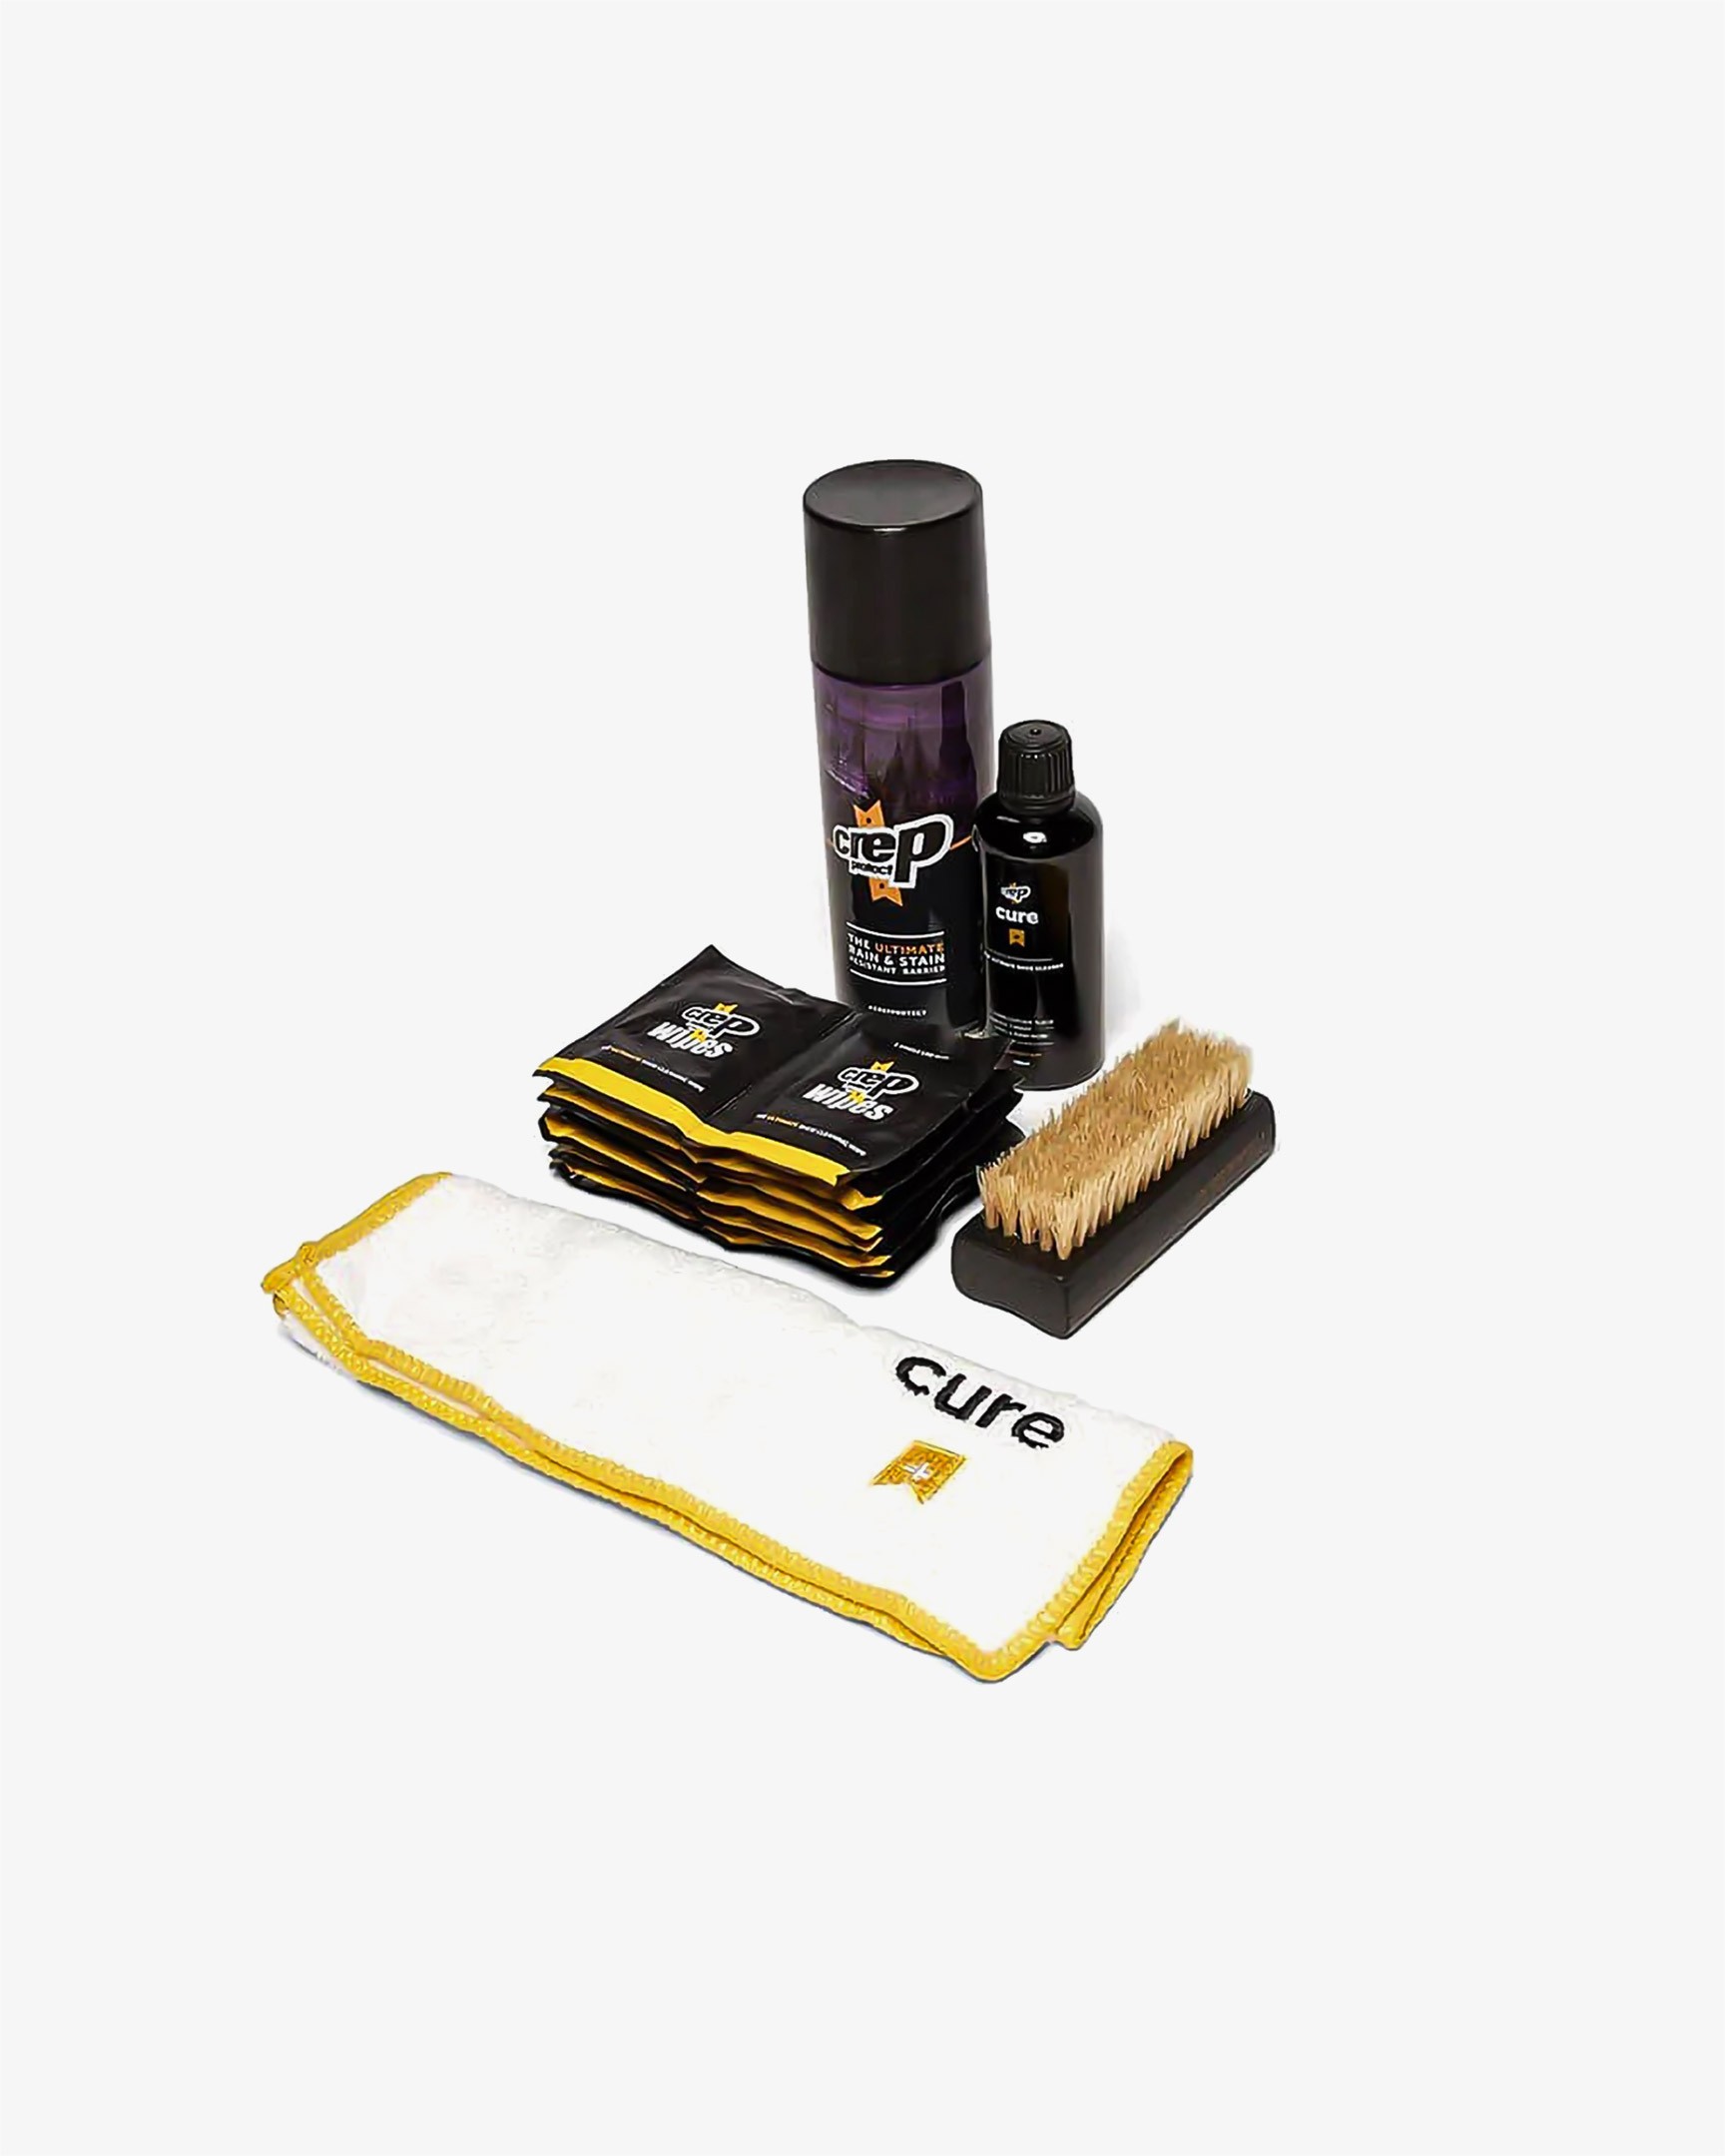 Crep Protect - Ultimate Gift Pack